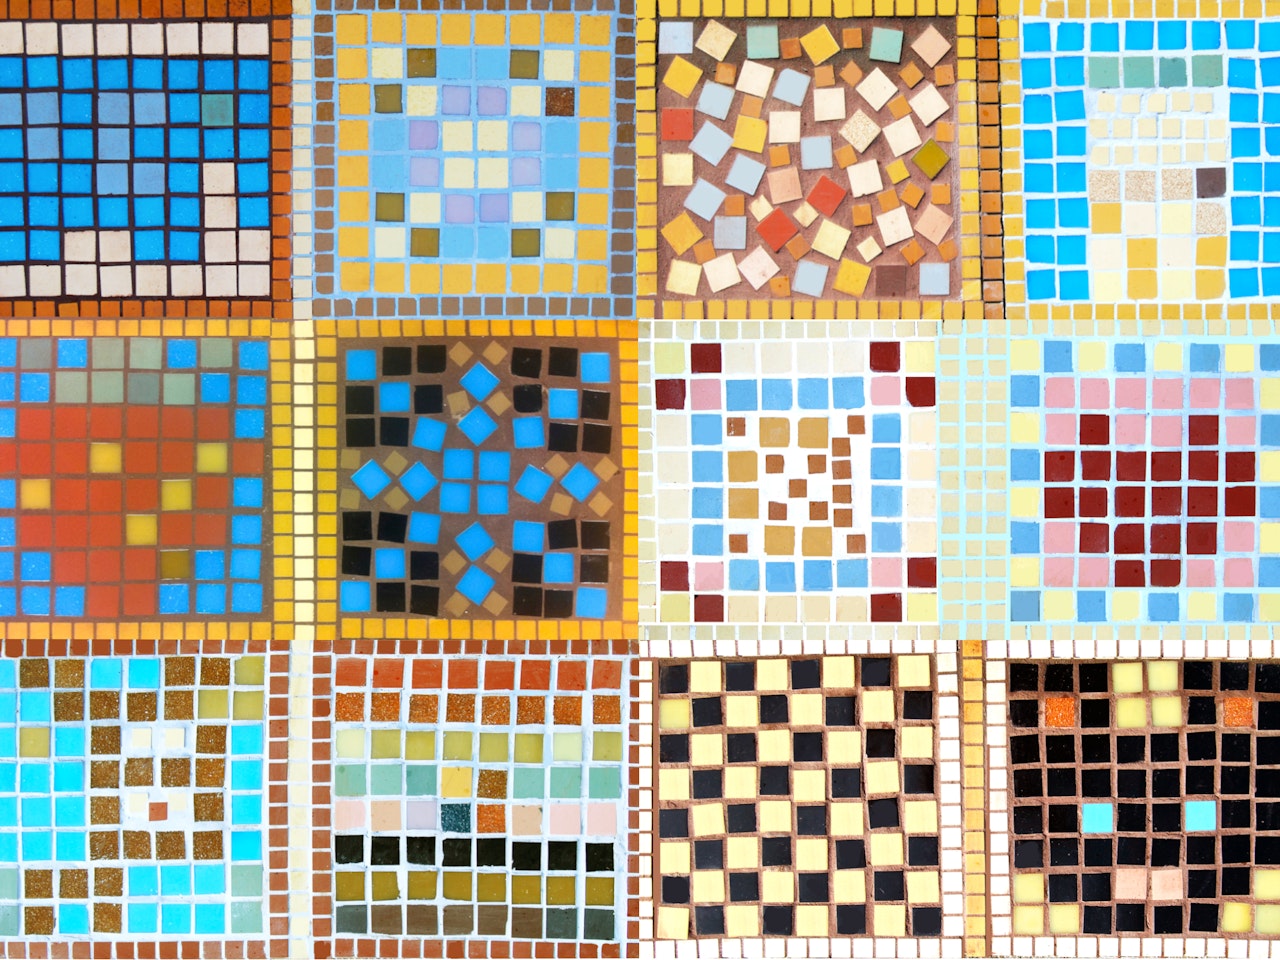 Mosaic projects